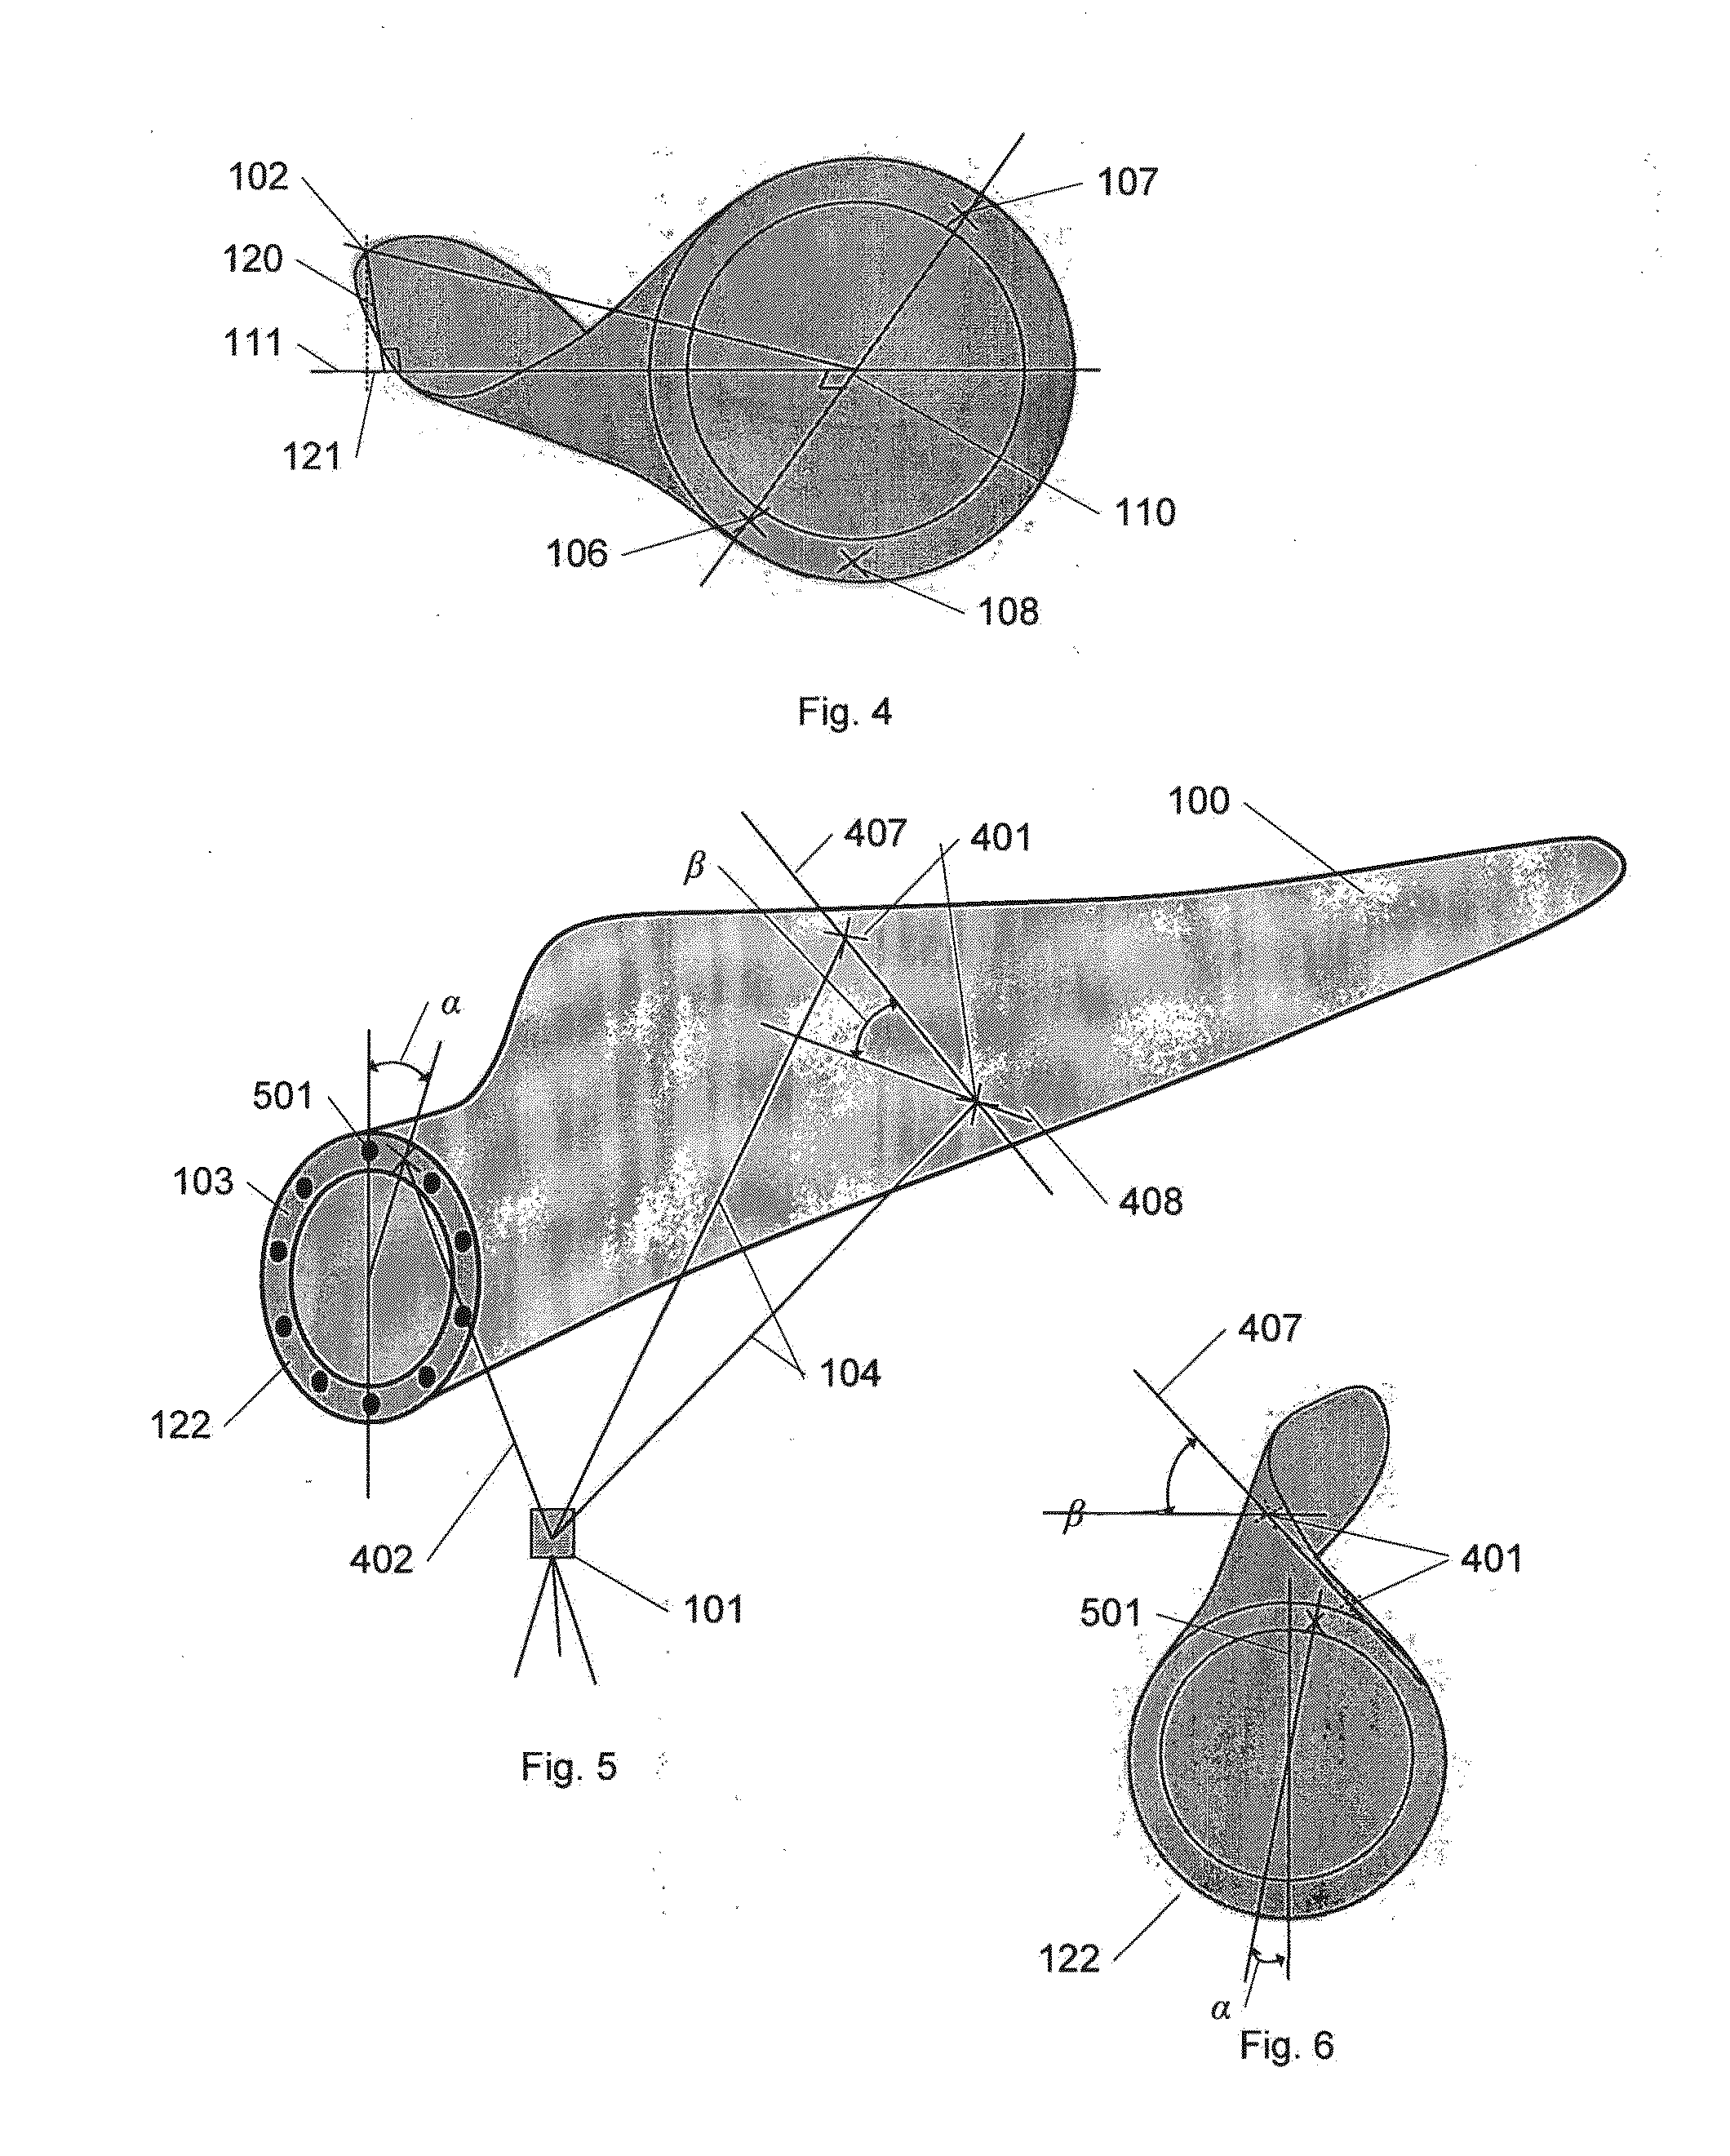 Measuring of geometrical parameters for a wind turbine blade